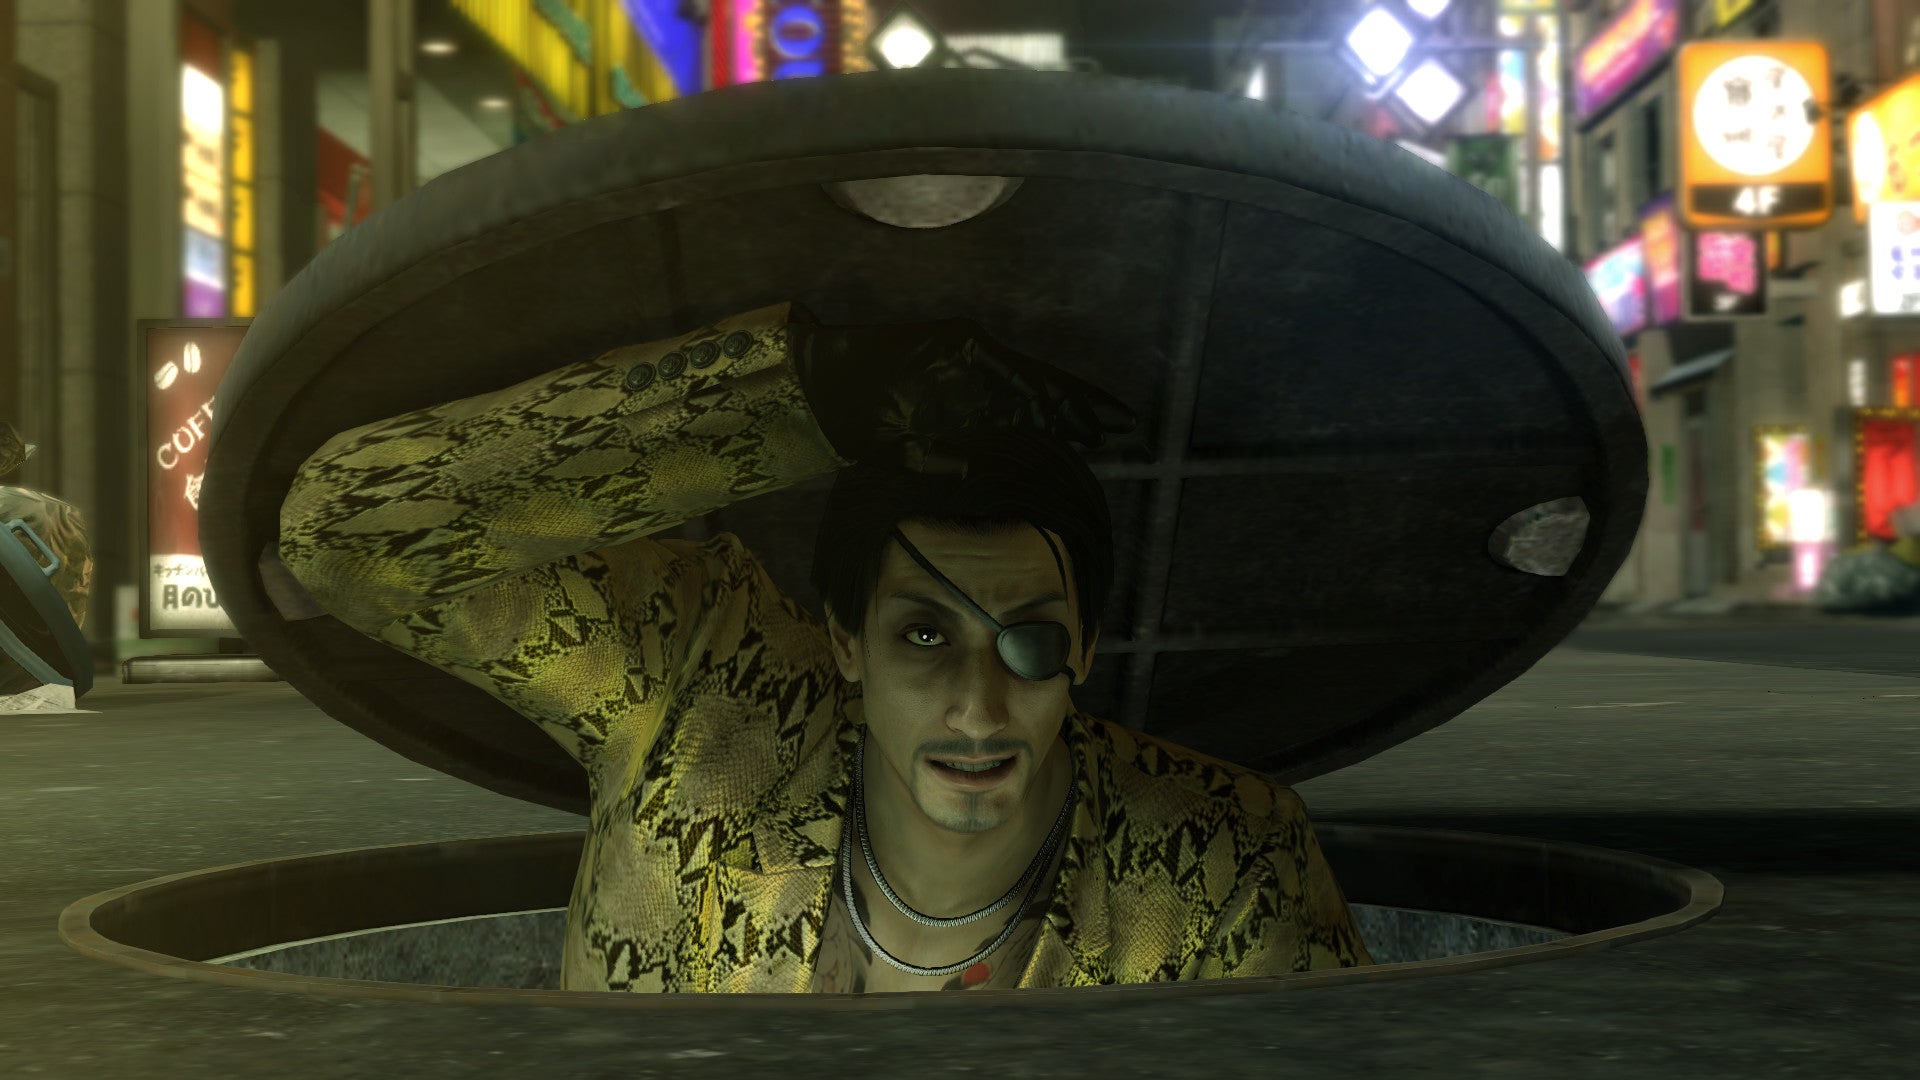 Yakuza's chief producer is surprised by Majima's unrelenting
sex appeal